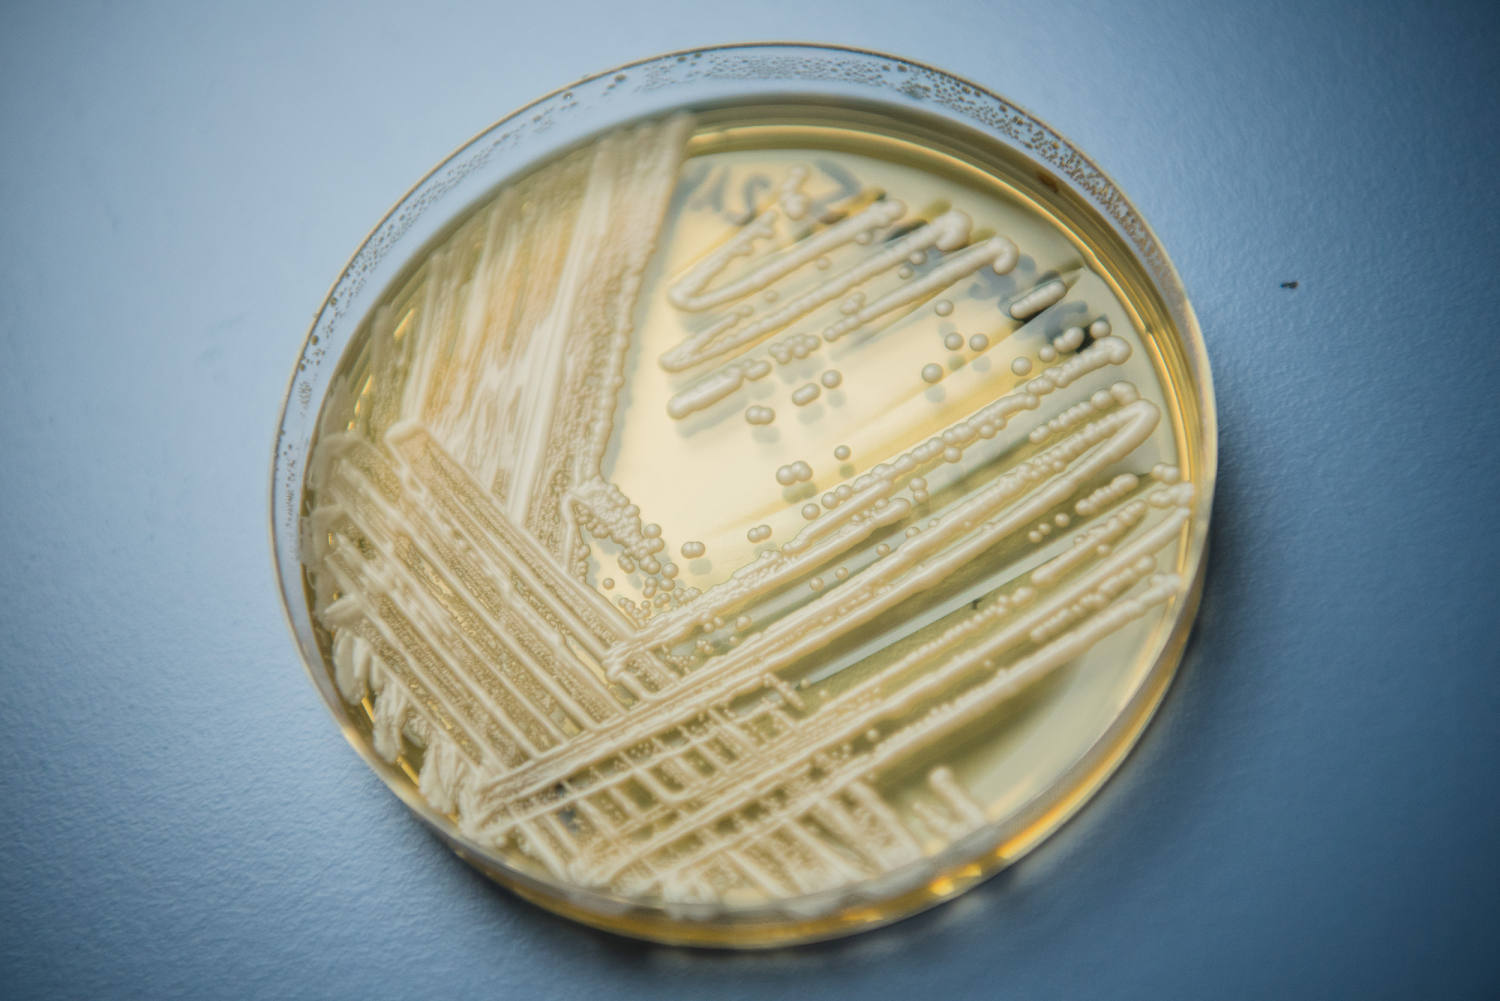 Washington faces first outbreak of a deadly fungal infection that's on the rise in the U.S.